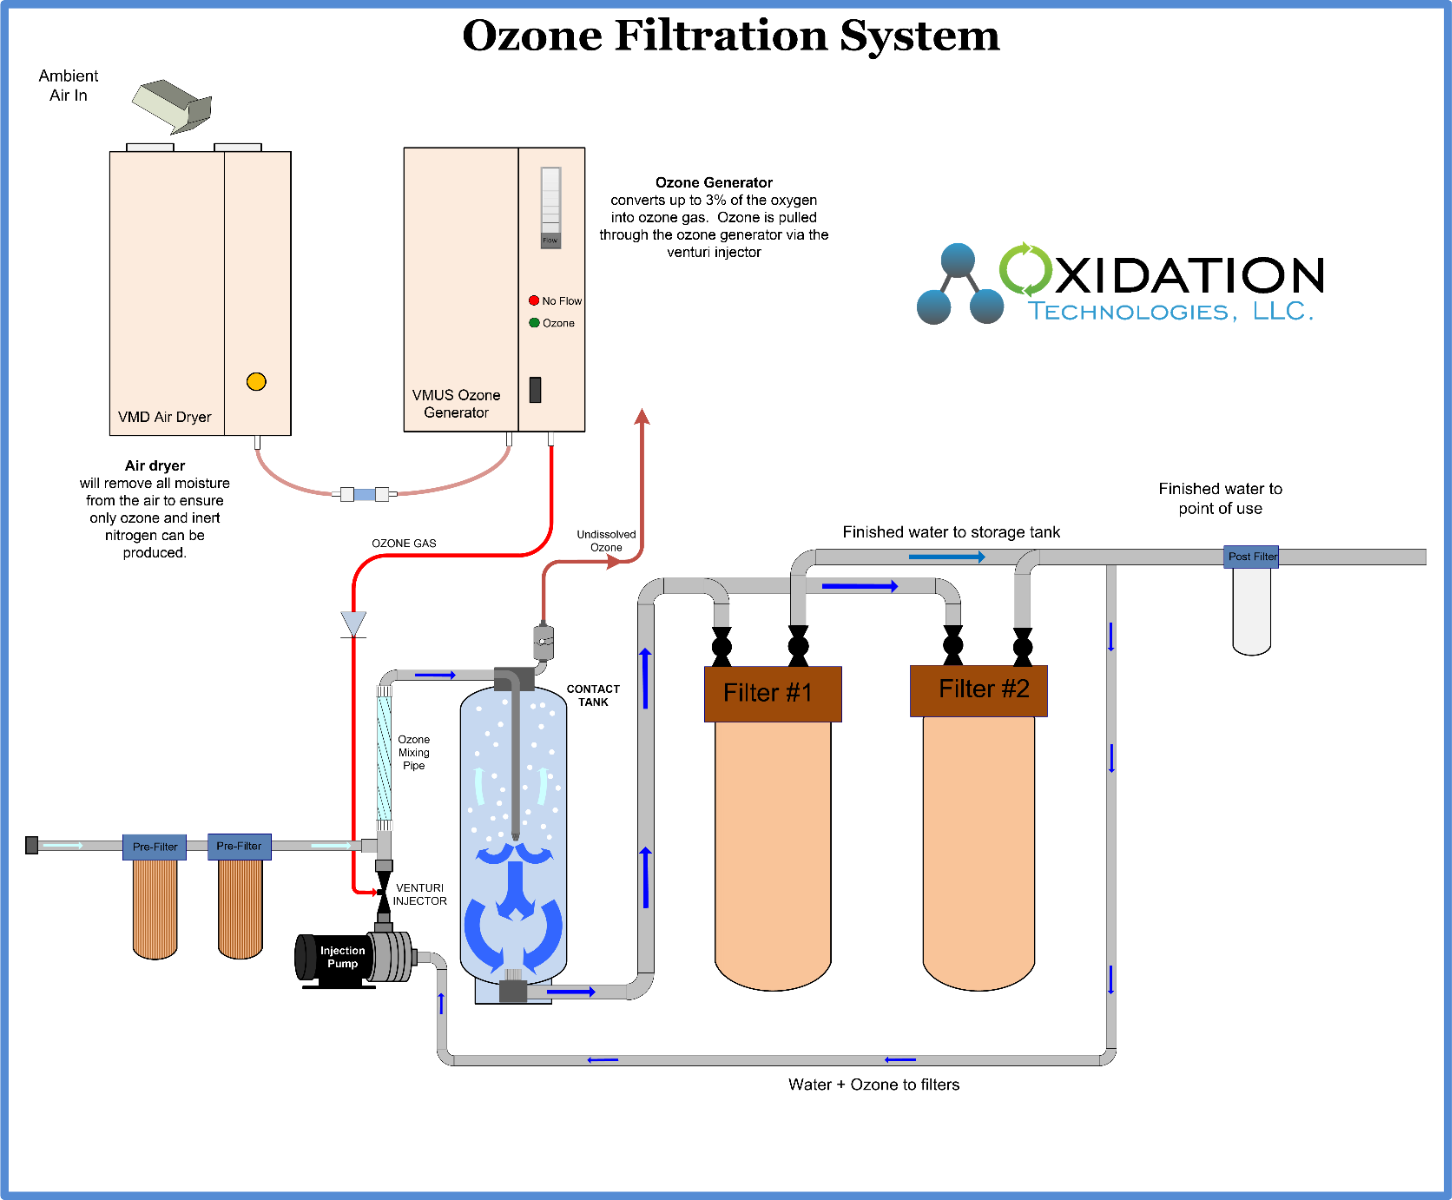 Ozone Injection and filtration system